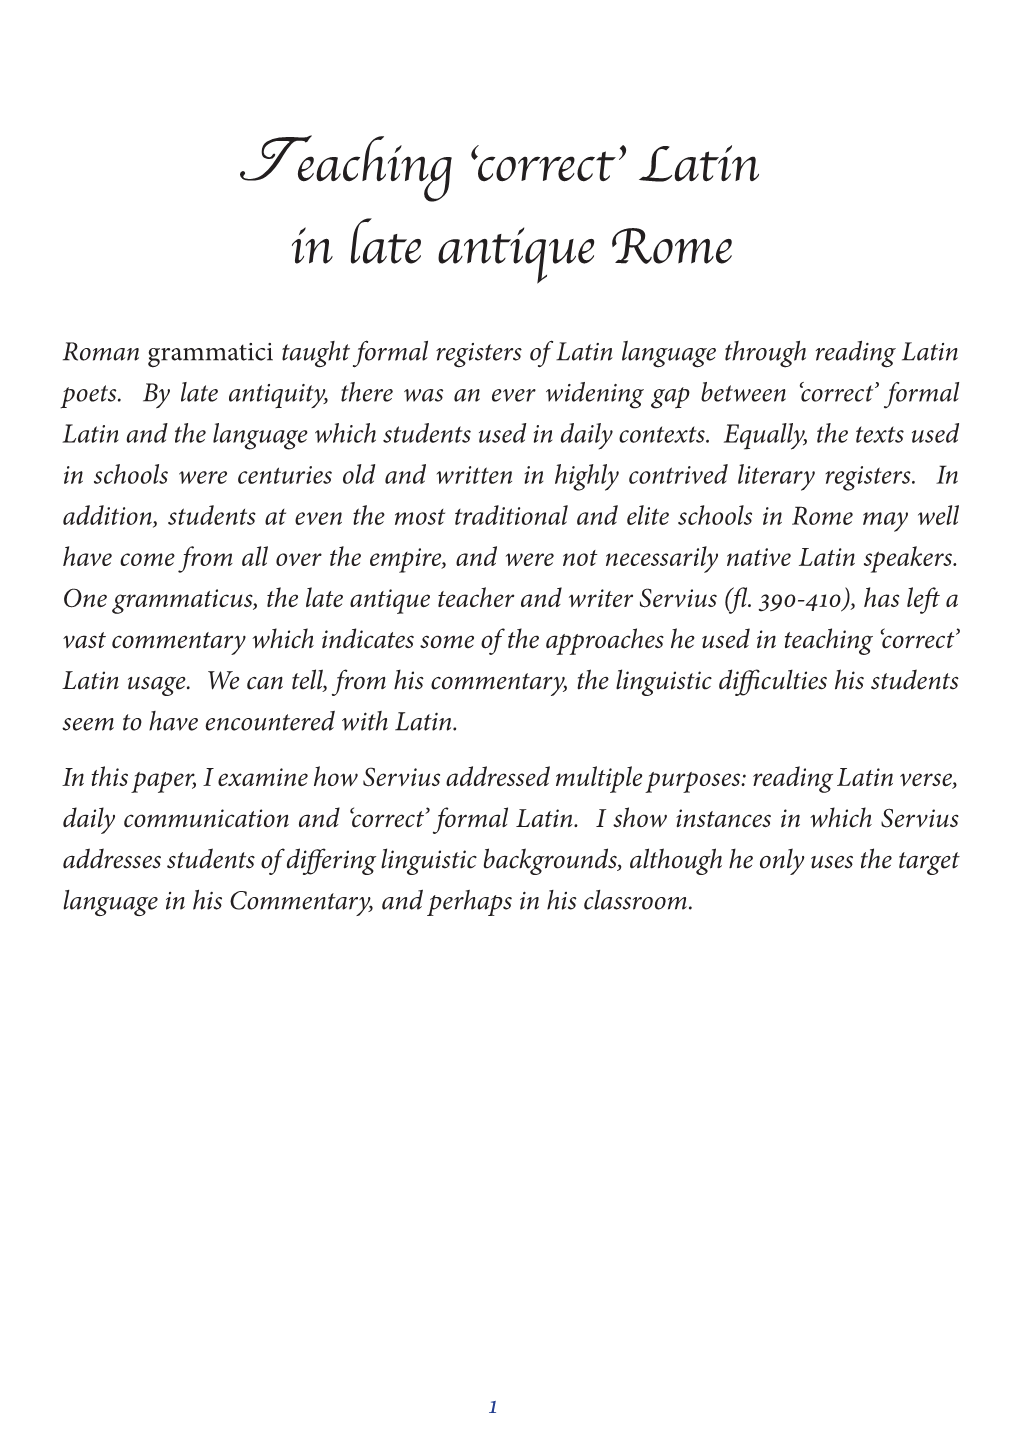 'Correct' Latin in Late Antique Rome